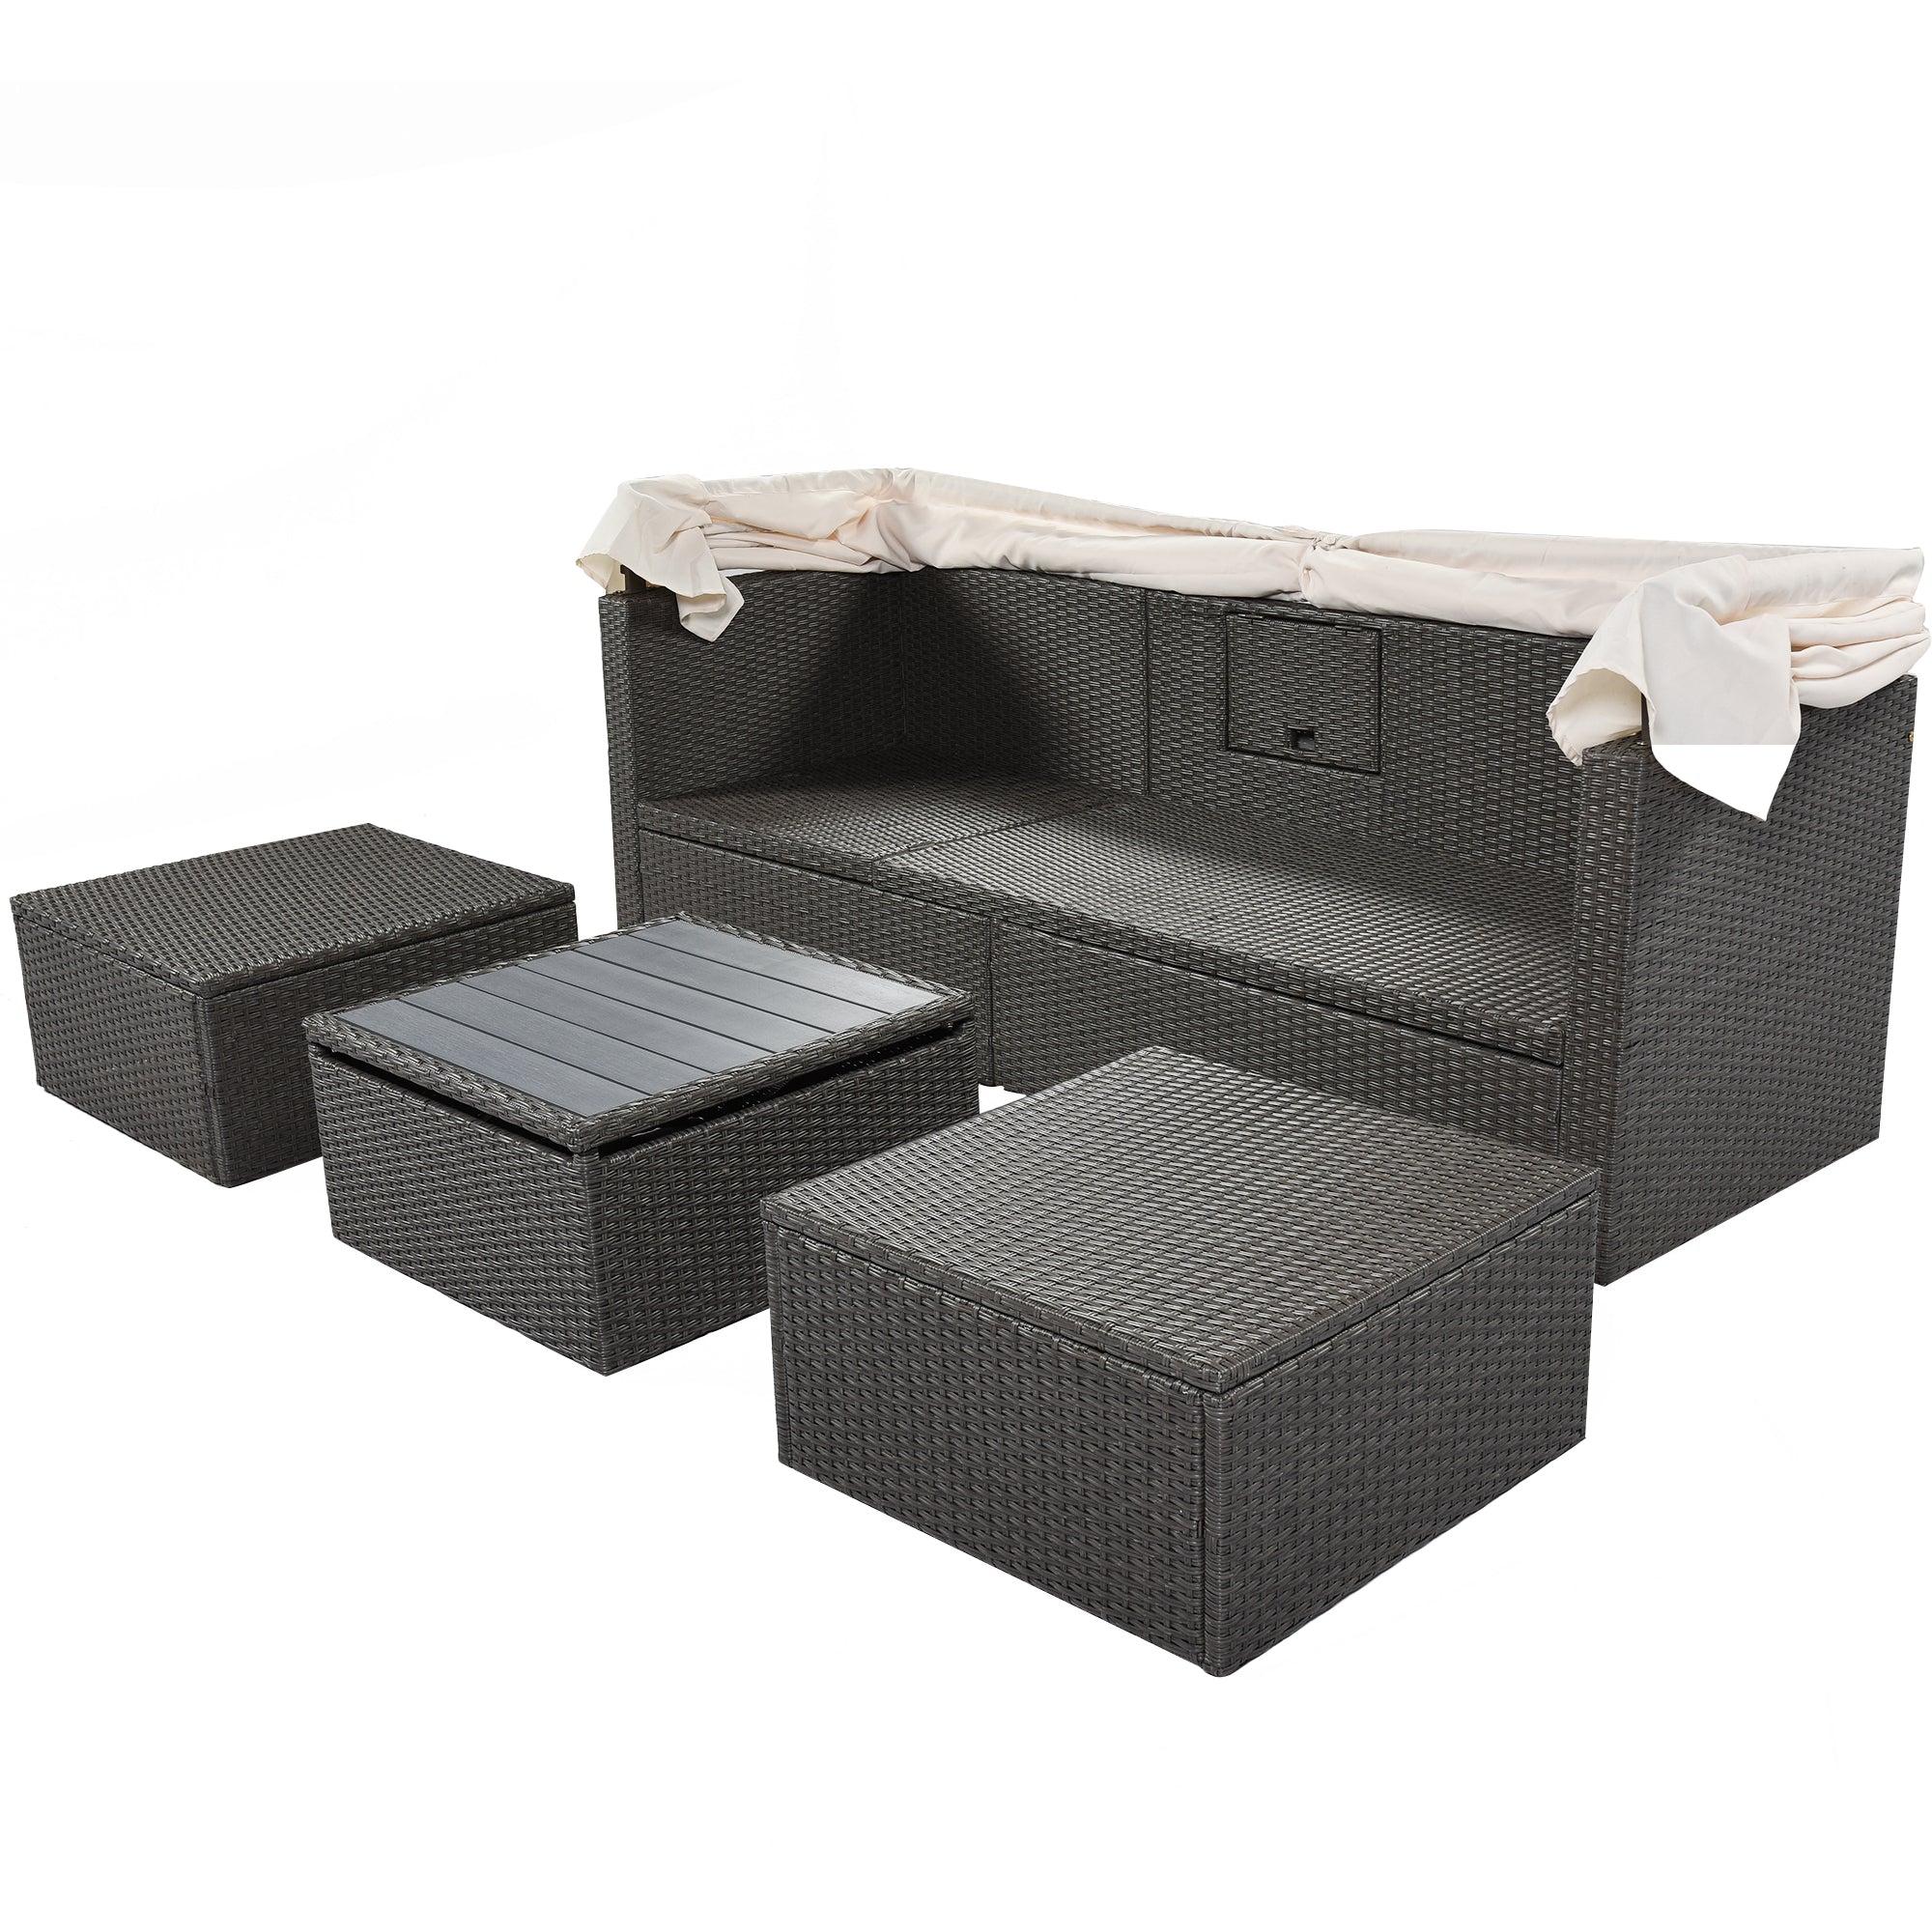 U Style Outdoor Patio Rectangle Daybed with beige-rattan